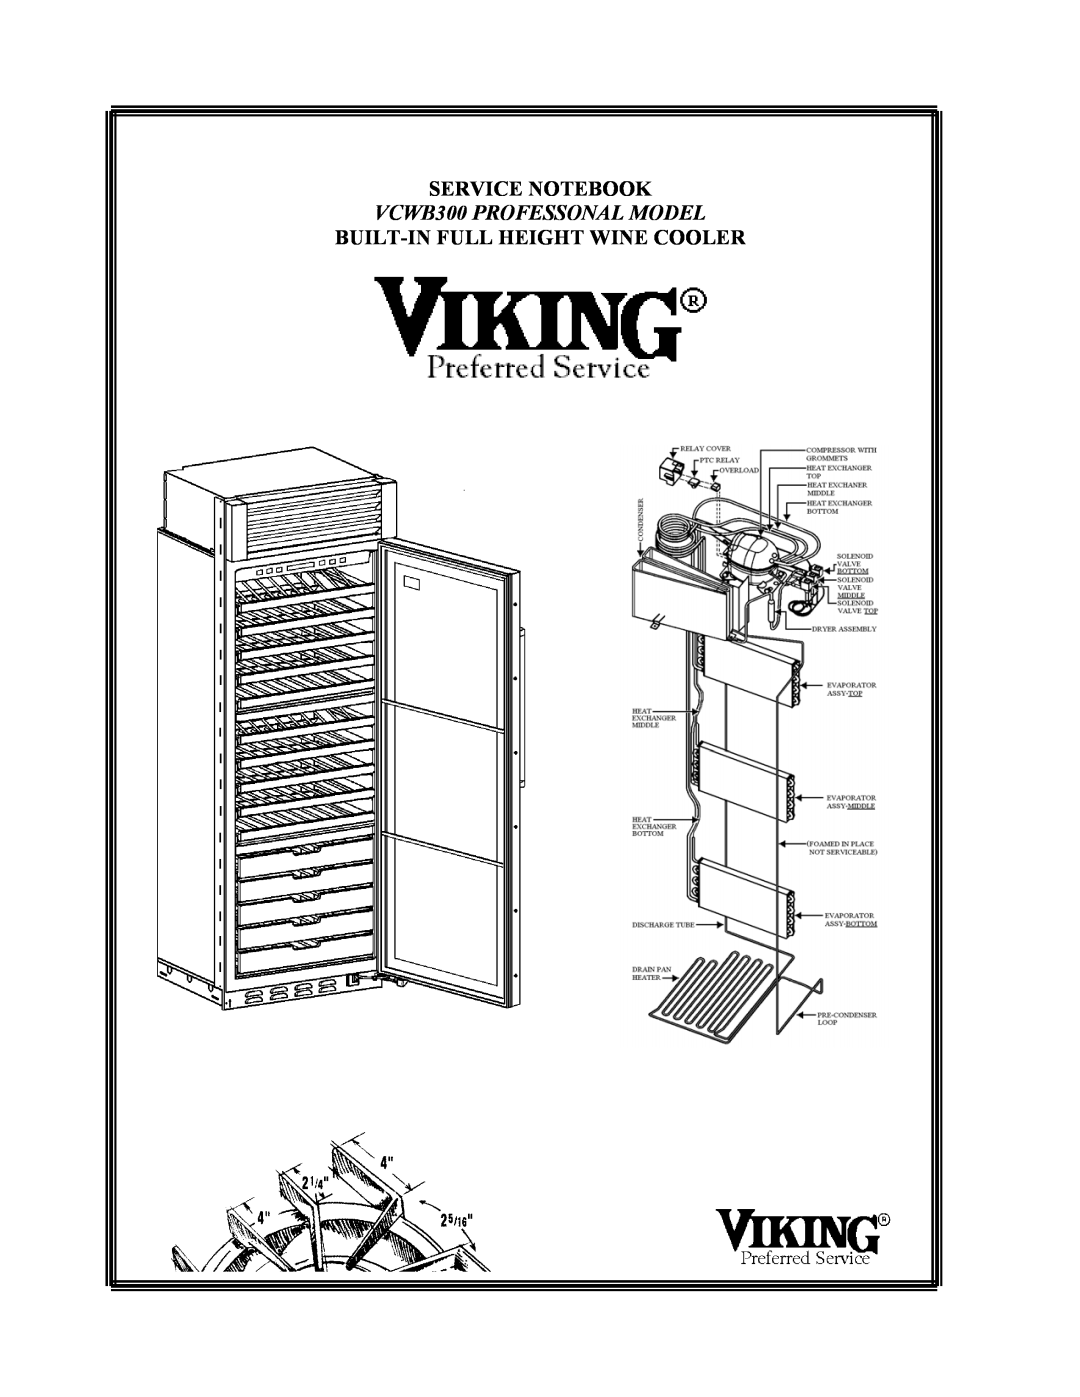 Viking DFWB, VCWB300 specifications Refrigeration, Standard Features & Accessories, Model Options, All models include 